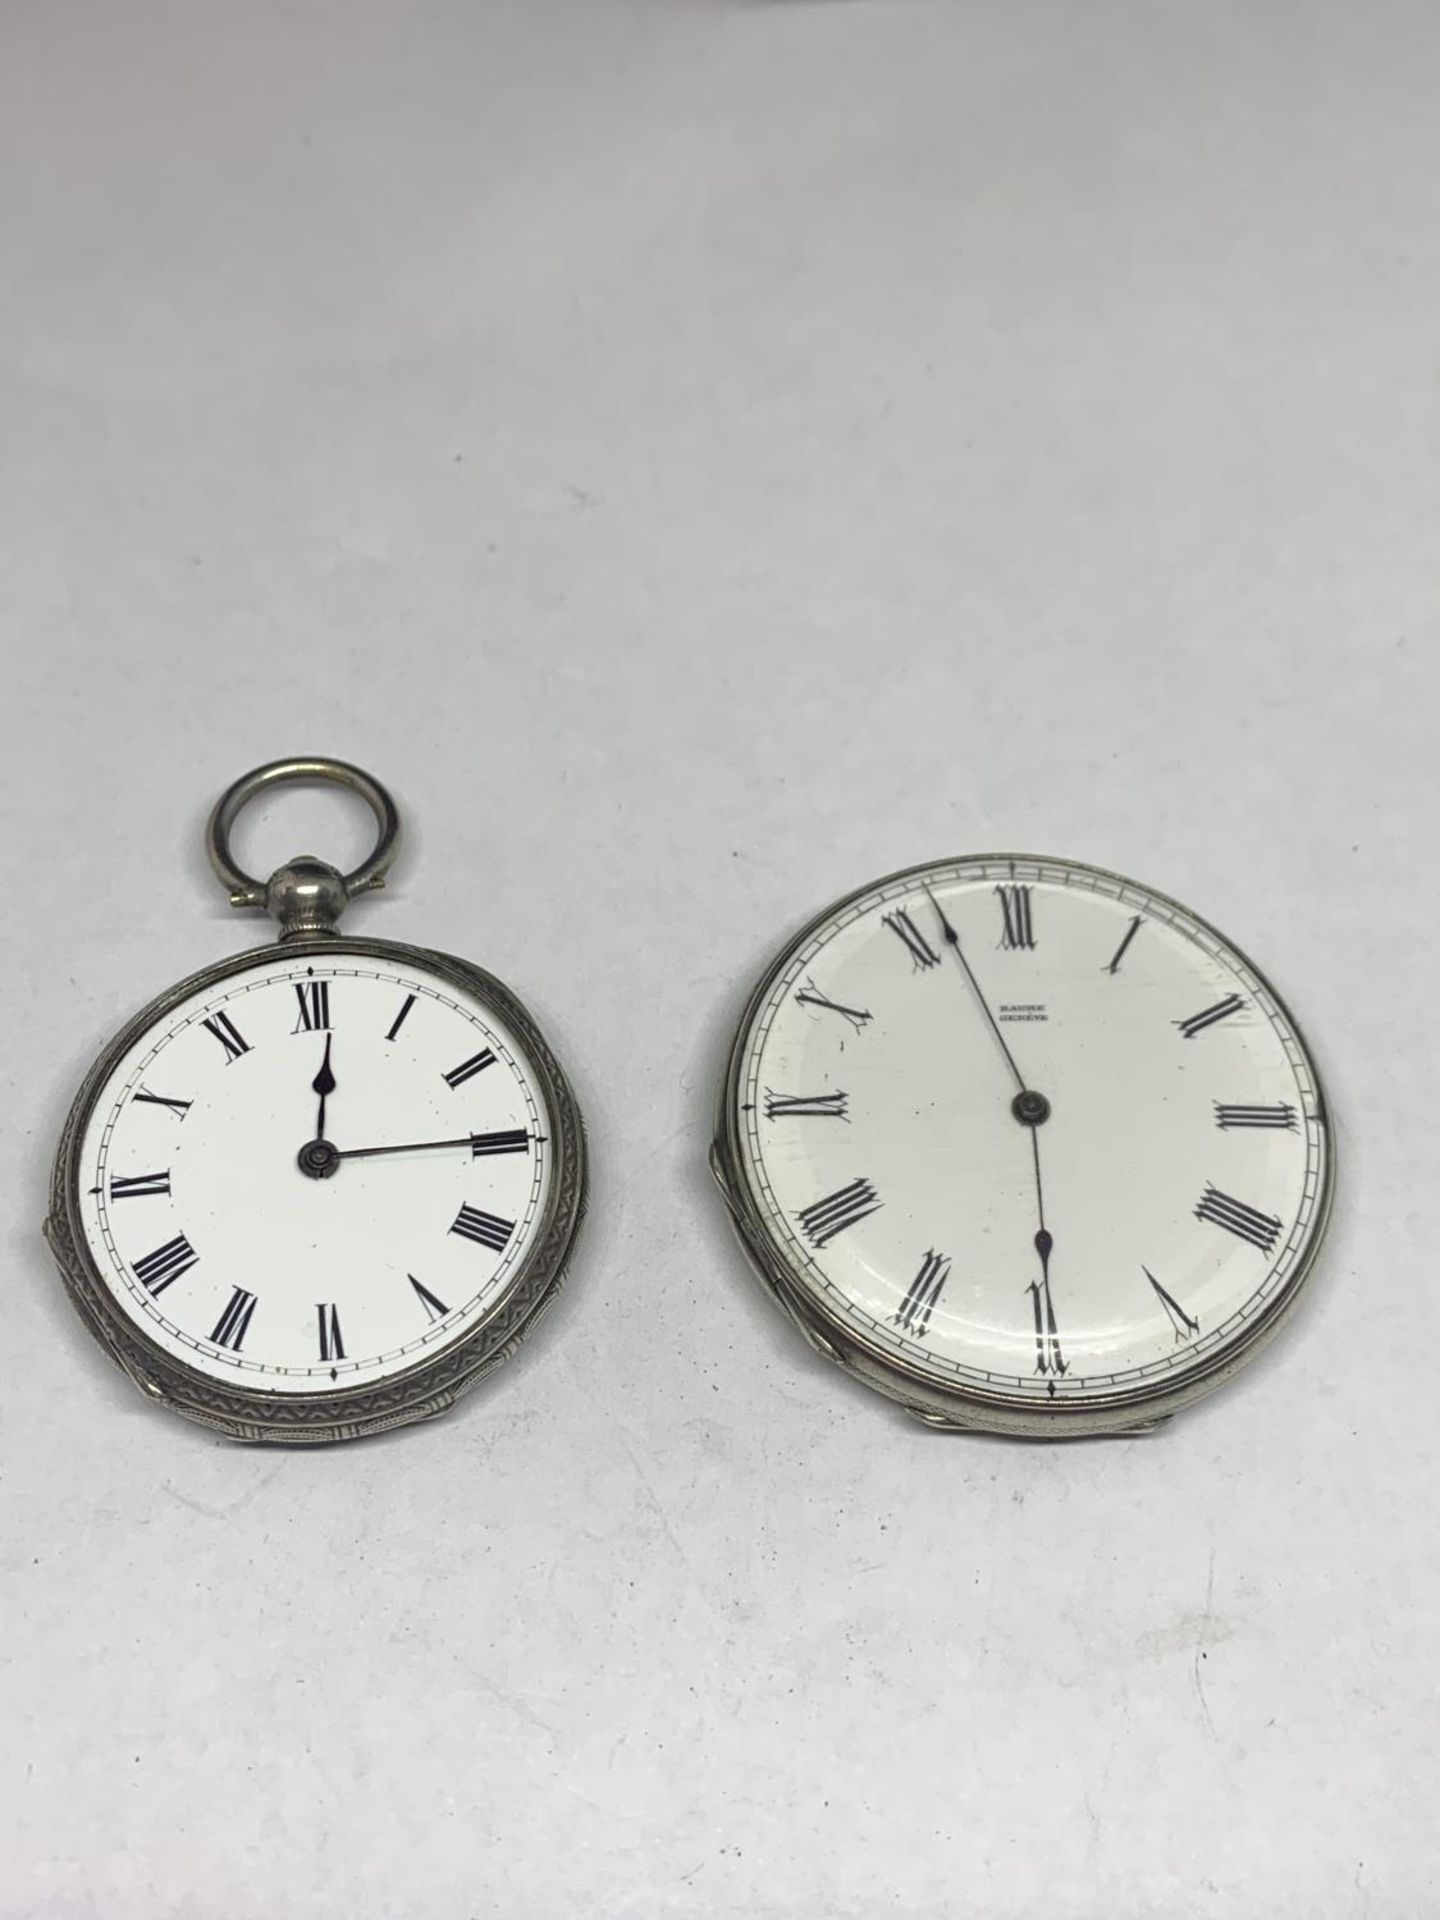 TWO SILVER POCKET WATCHES ONE GLASS A/F